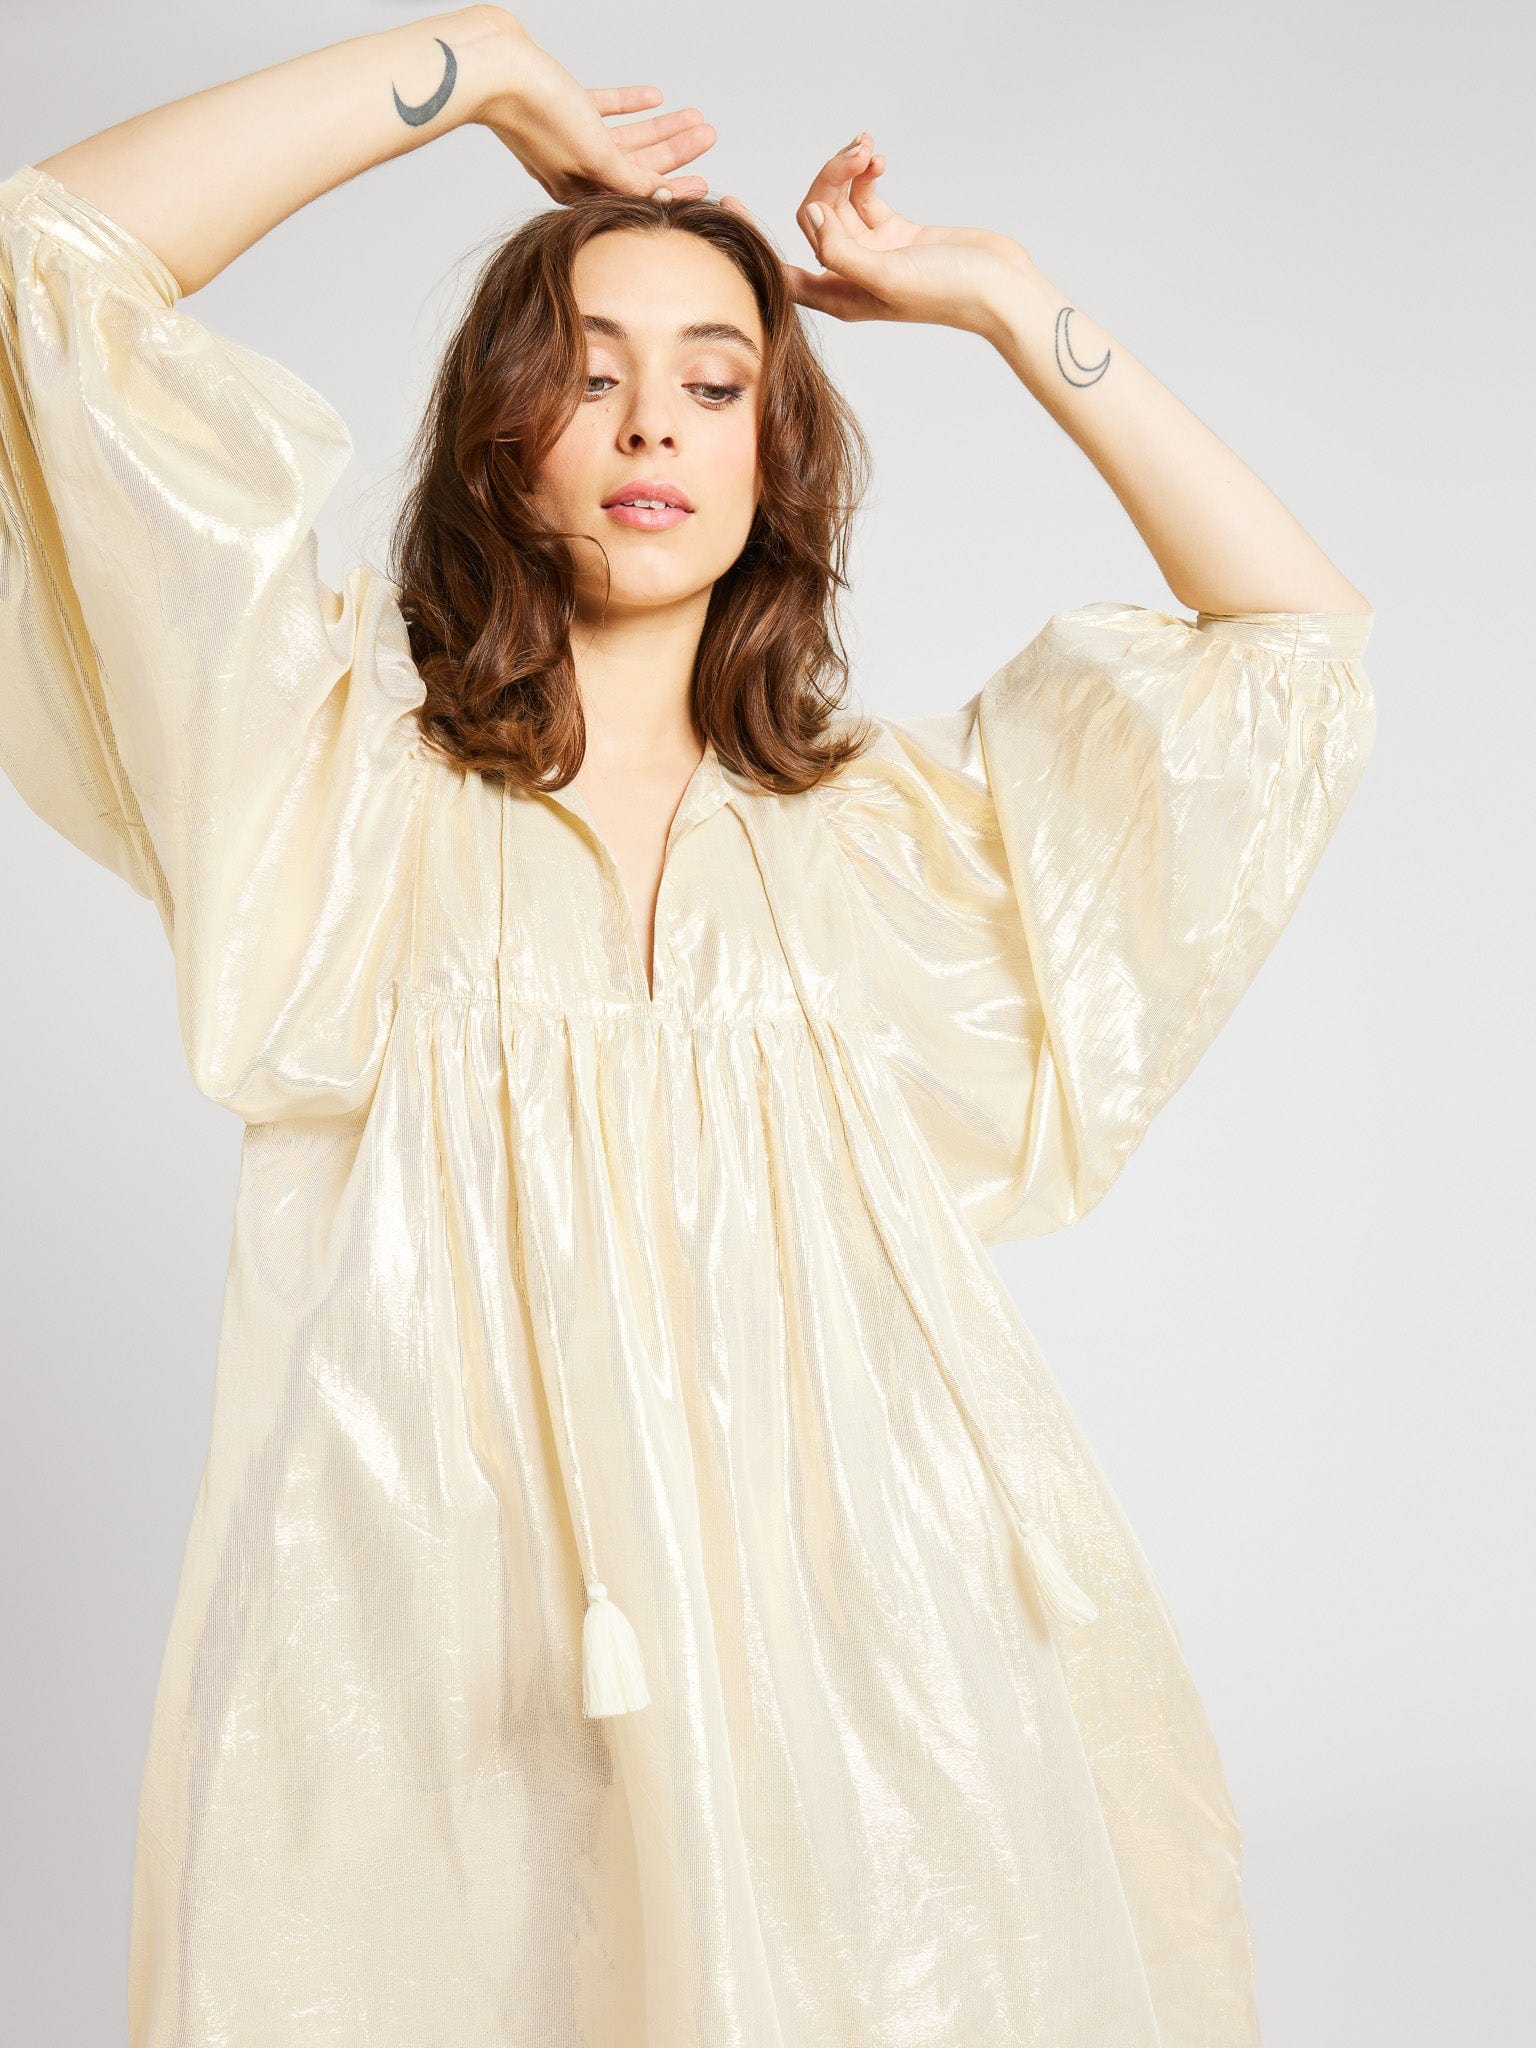 MILLE Clothing Daisy Dress in Gold Lamé